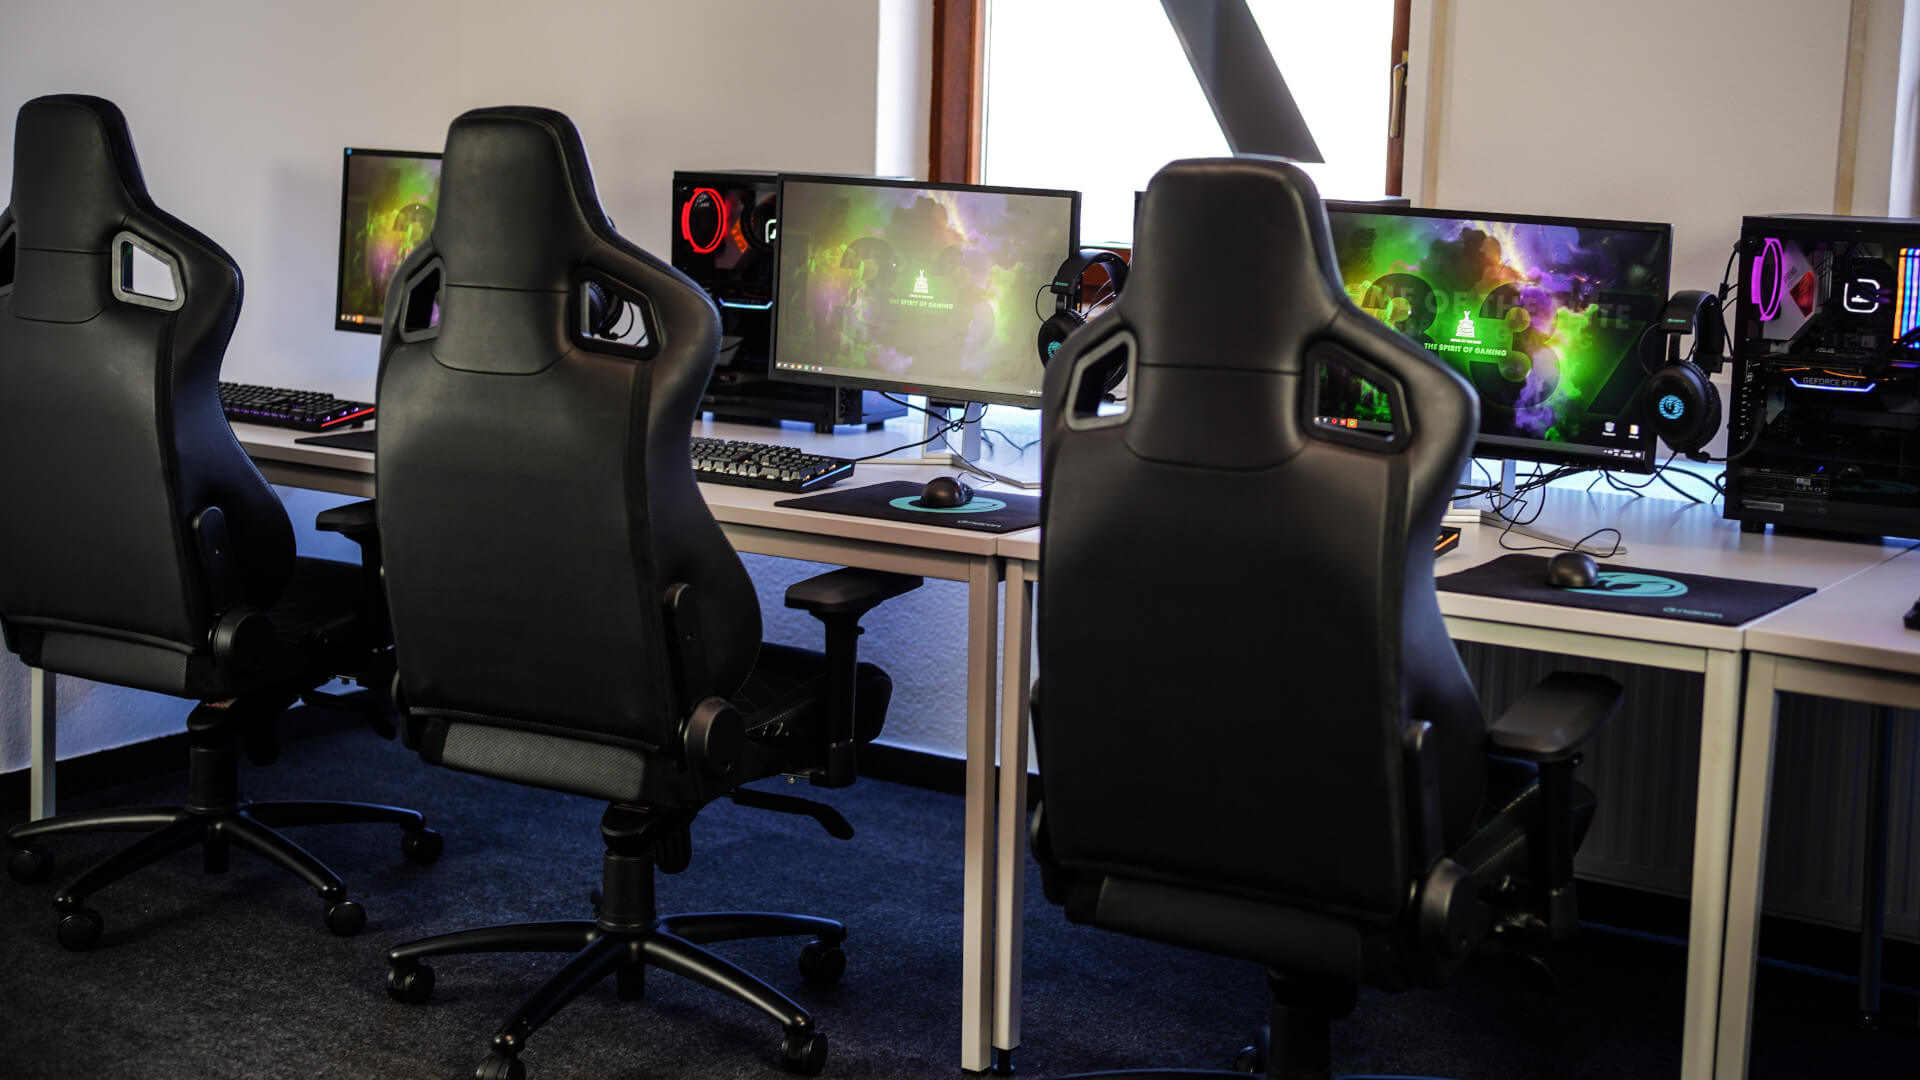 Make your daily gaming experience more comfortable with gaming chairs. Check out the TOP 5 ranking by Mebway